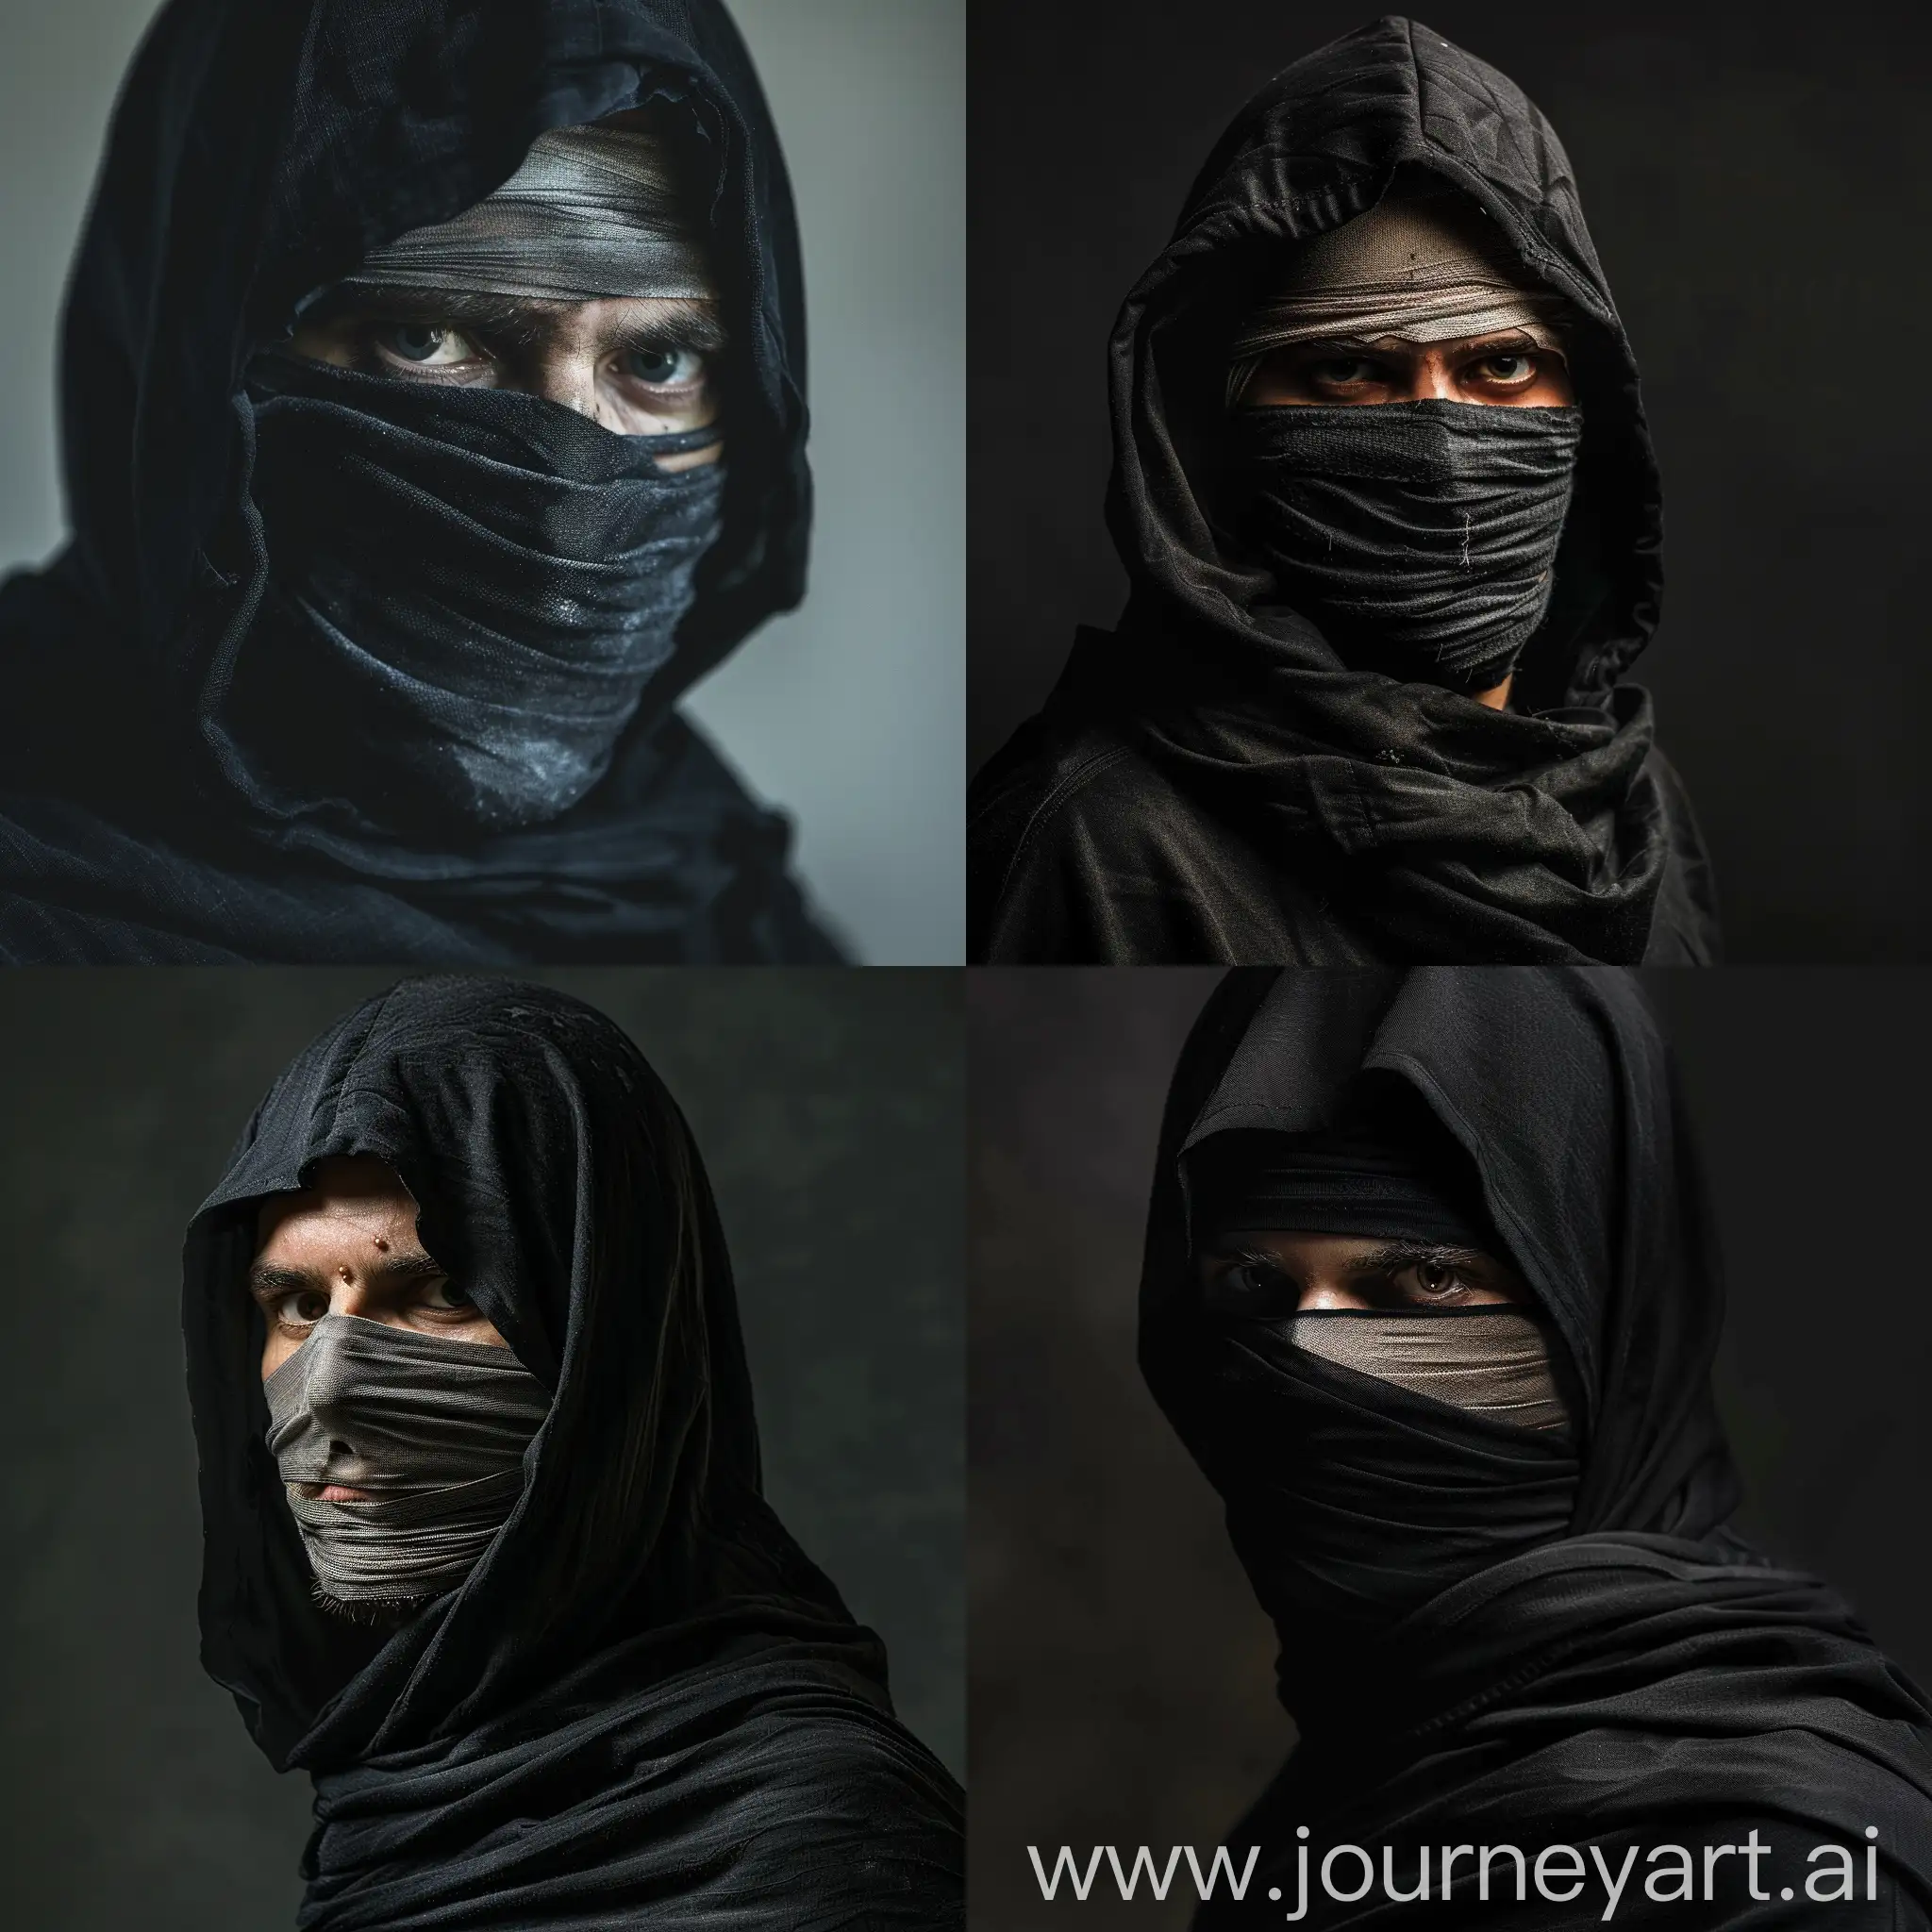 Mysterious-Figure-with-Bandaged-Face-in-Black-Hood